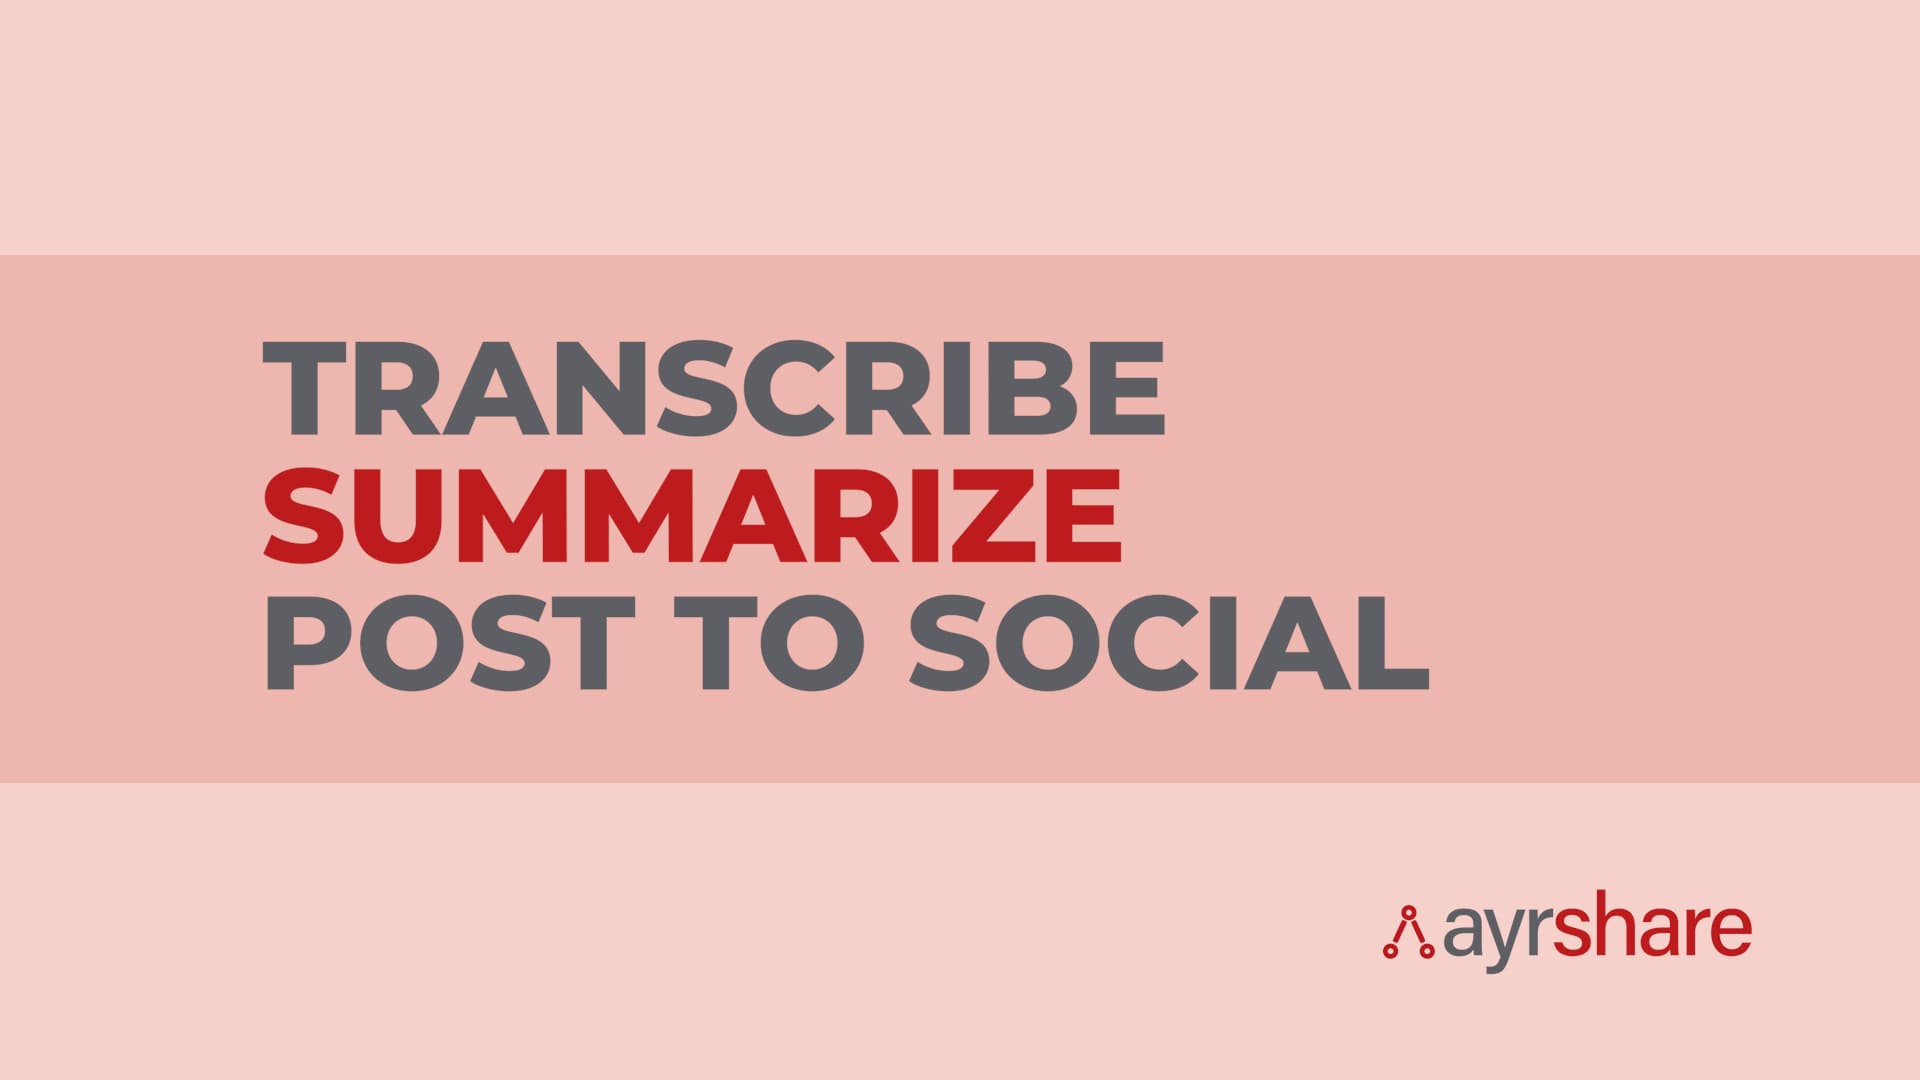 Transcribe Your Audio or Video File, Summarize it, and Post it to Social in 4 Easy API Calls